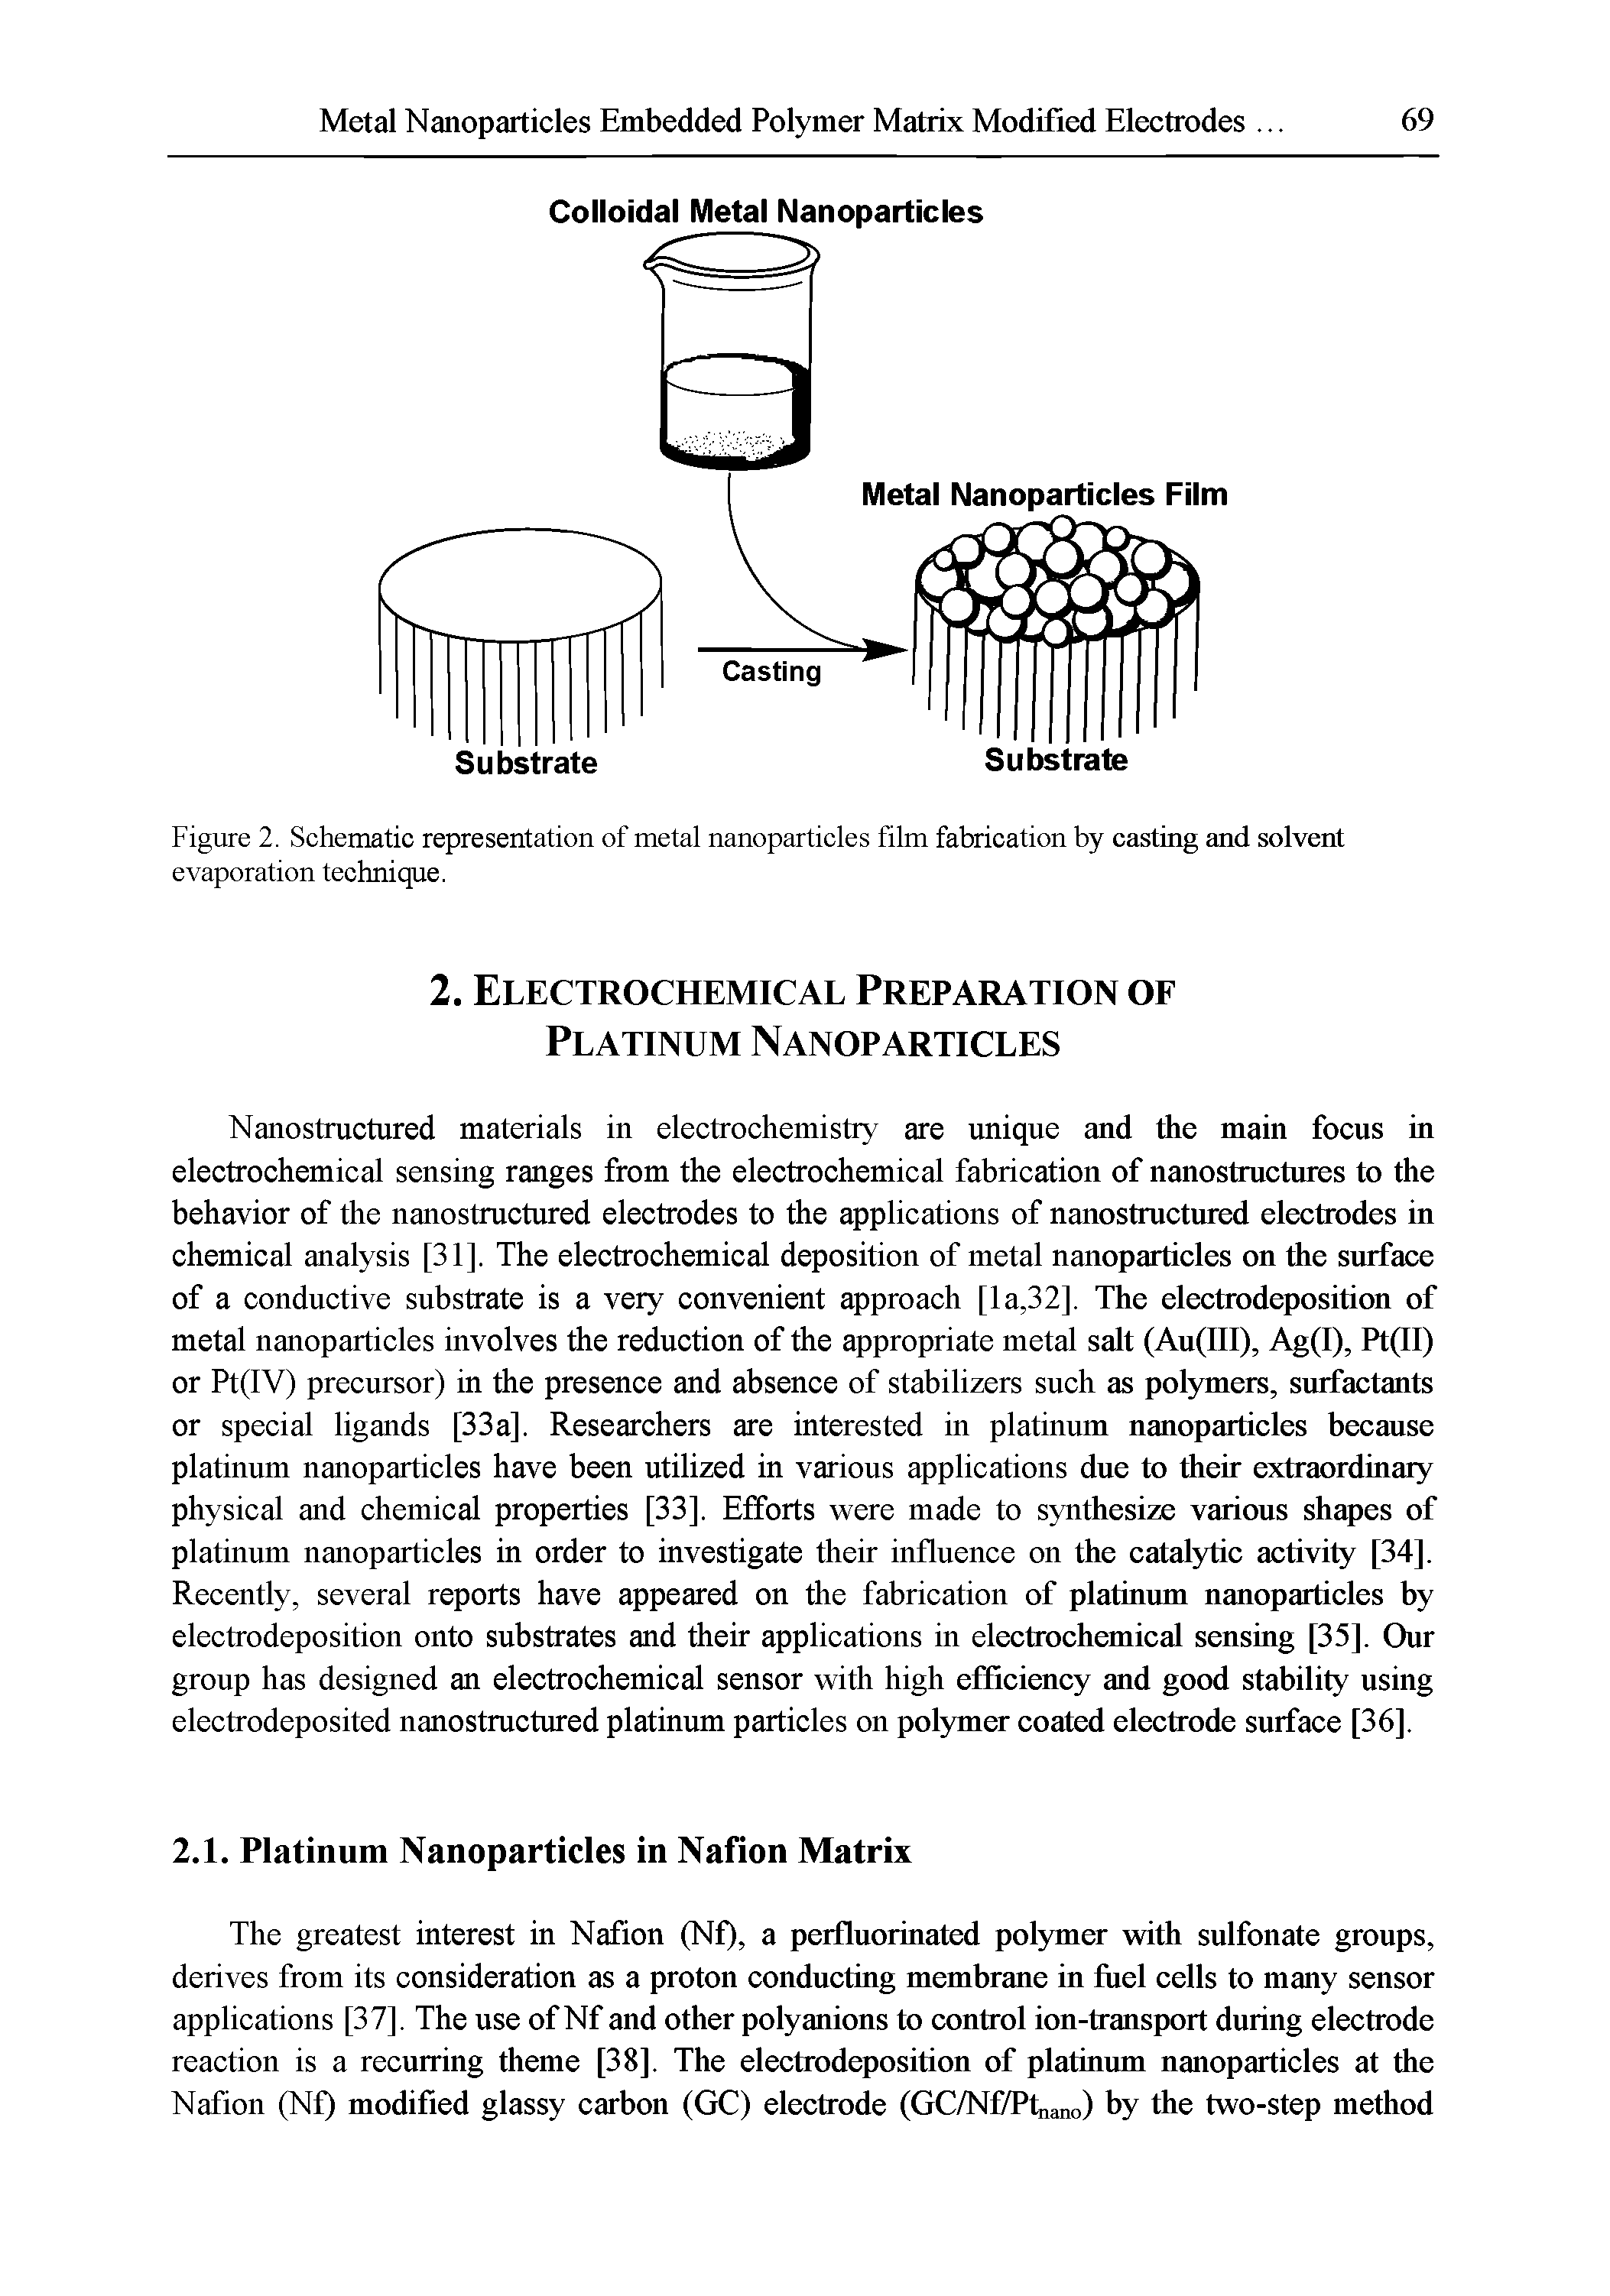 Figure 2. Schematic representation of metal nanoparticles film fabrication by casting and solvent evaporation technique.